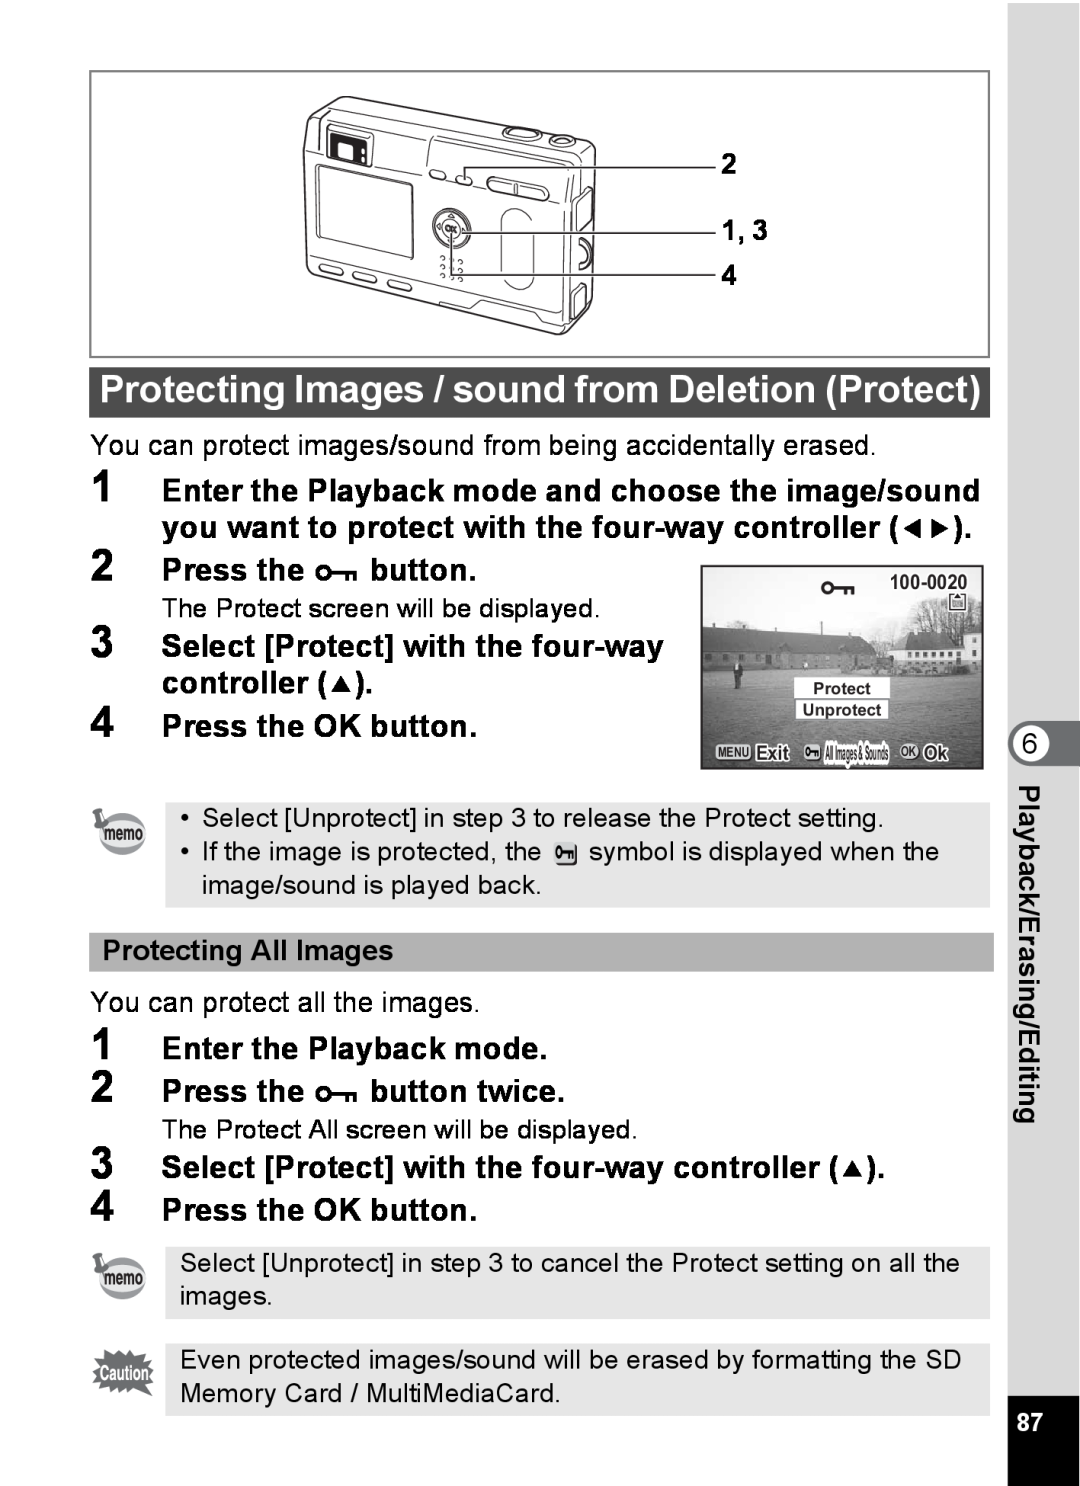 Pentax S4 manual Protecting Images / sound from Deletion Protect, Press the Z button 